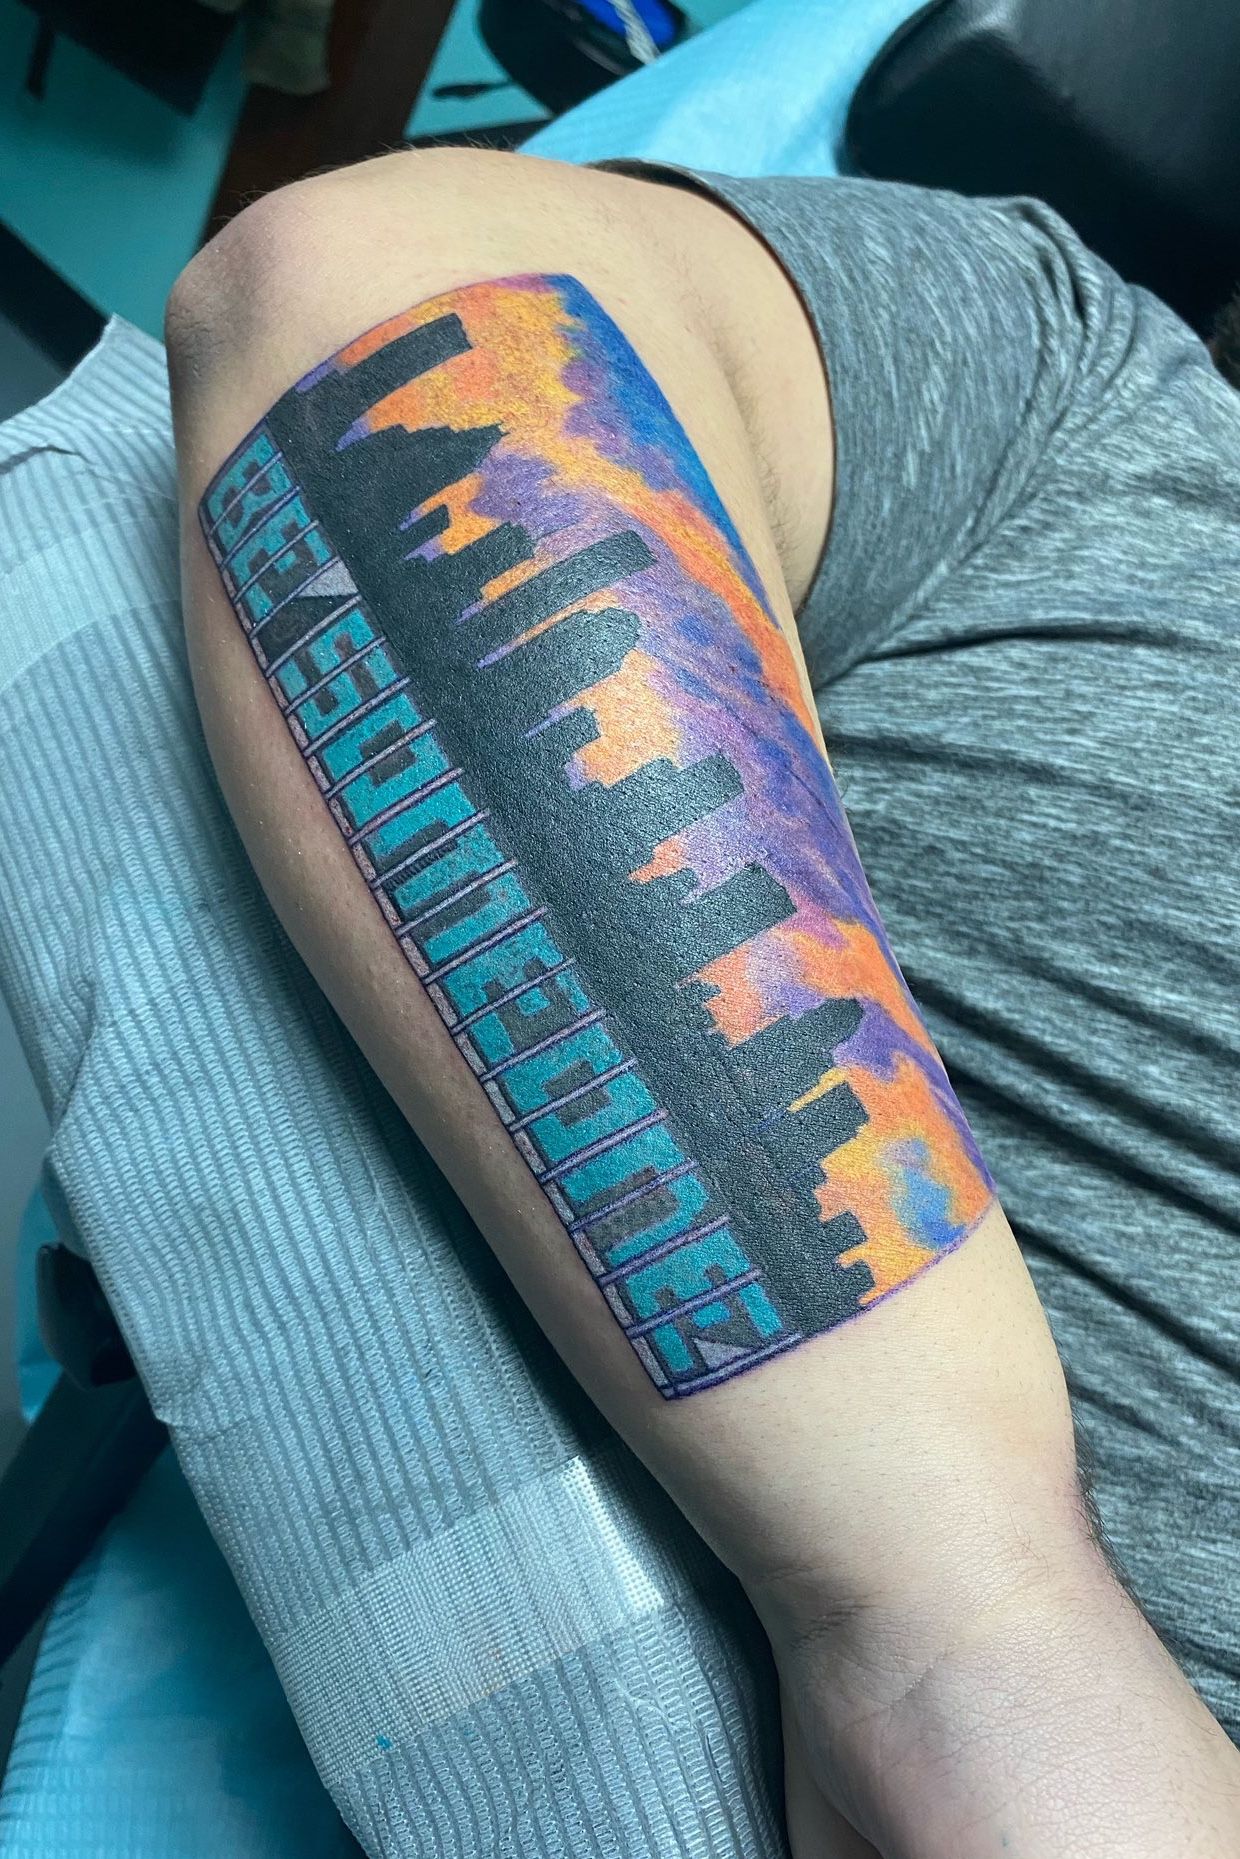 Houston man gets the most Houston tattoo ever